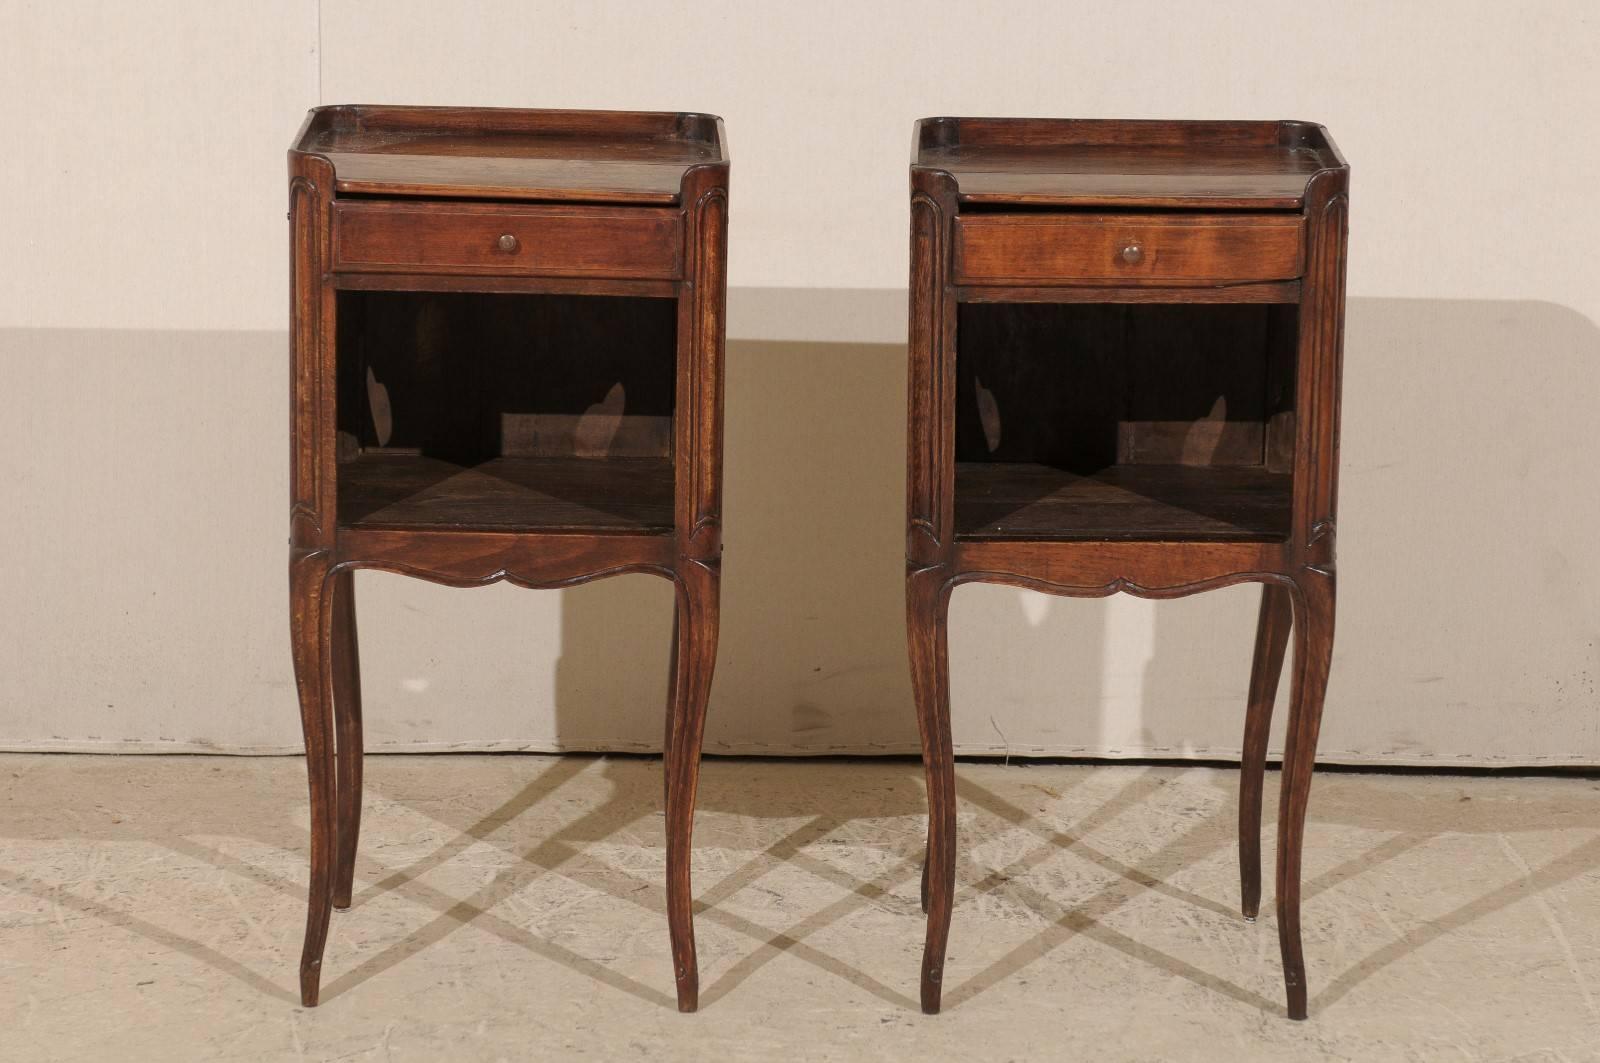 A pair of French 19th century side tables or nightstands. This pair of French stained wood bedside or side tables features a top drawer over an open lower shelf. The finish on the body is close to a Cabernet mahogany in color. The tabletop has